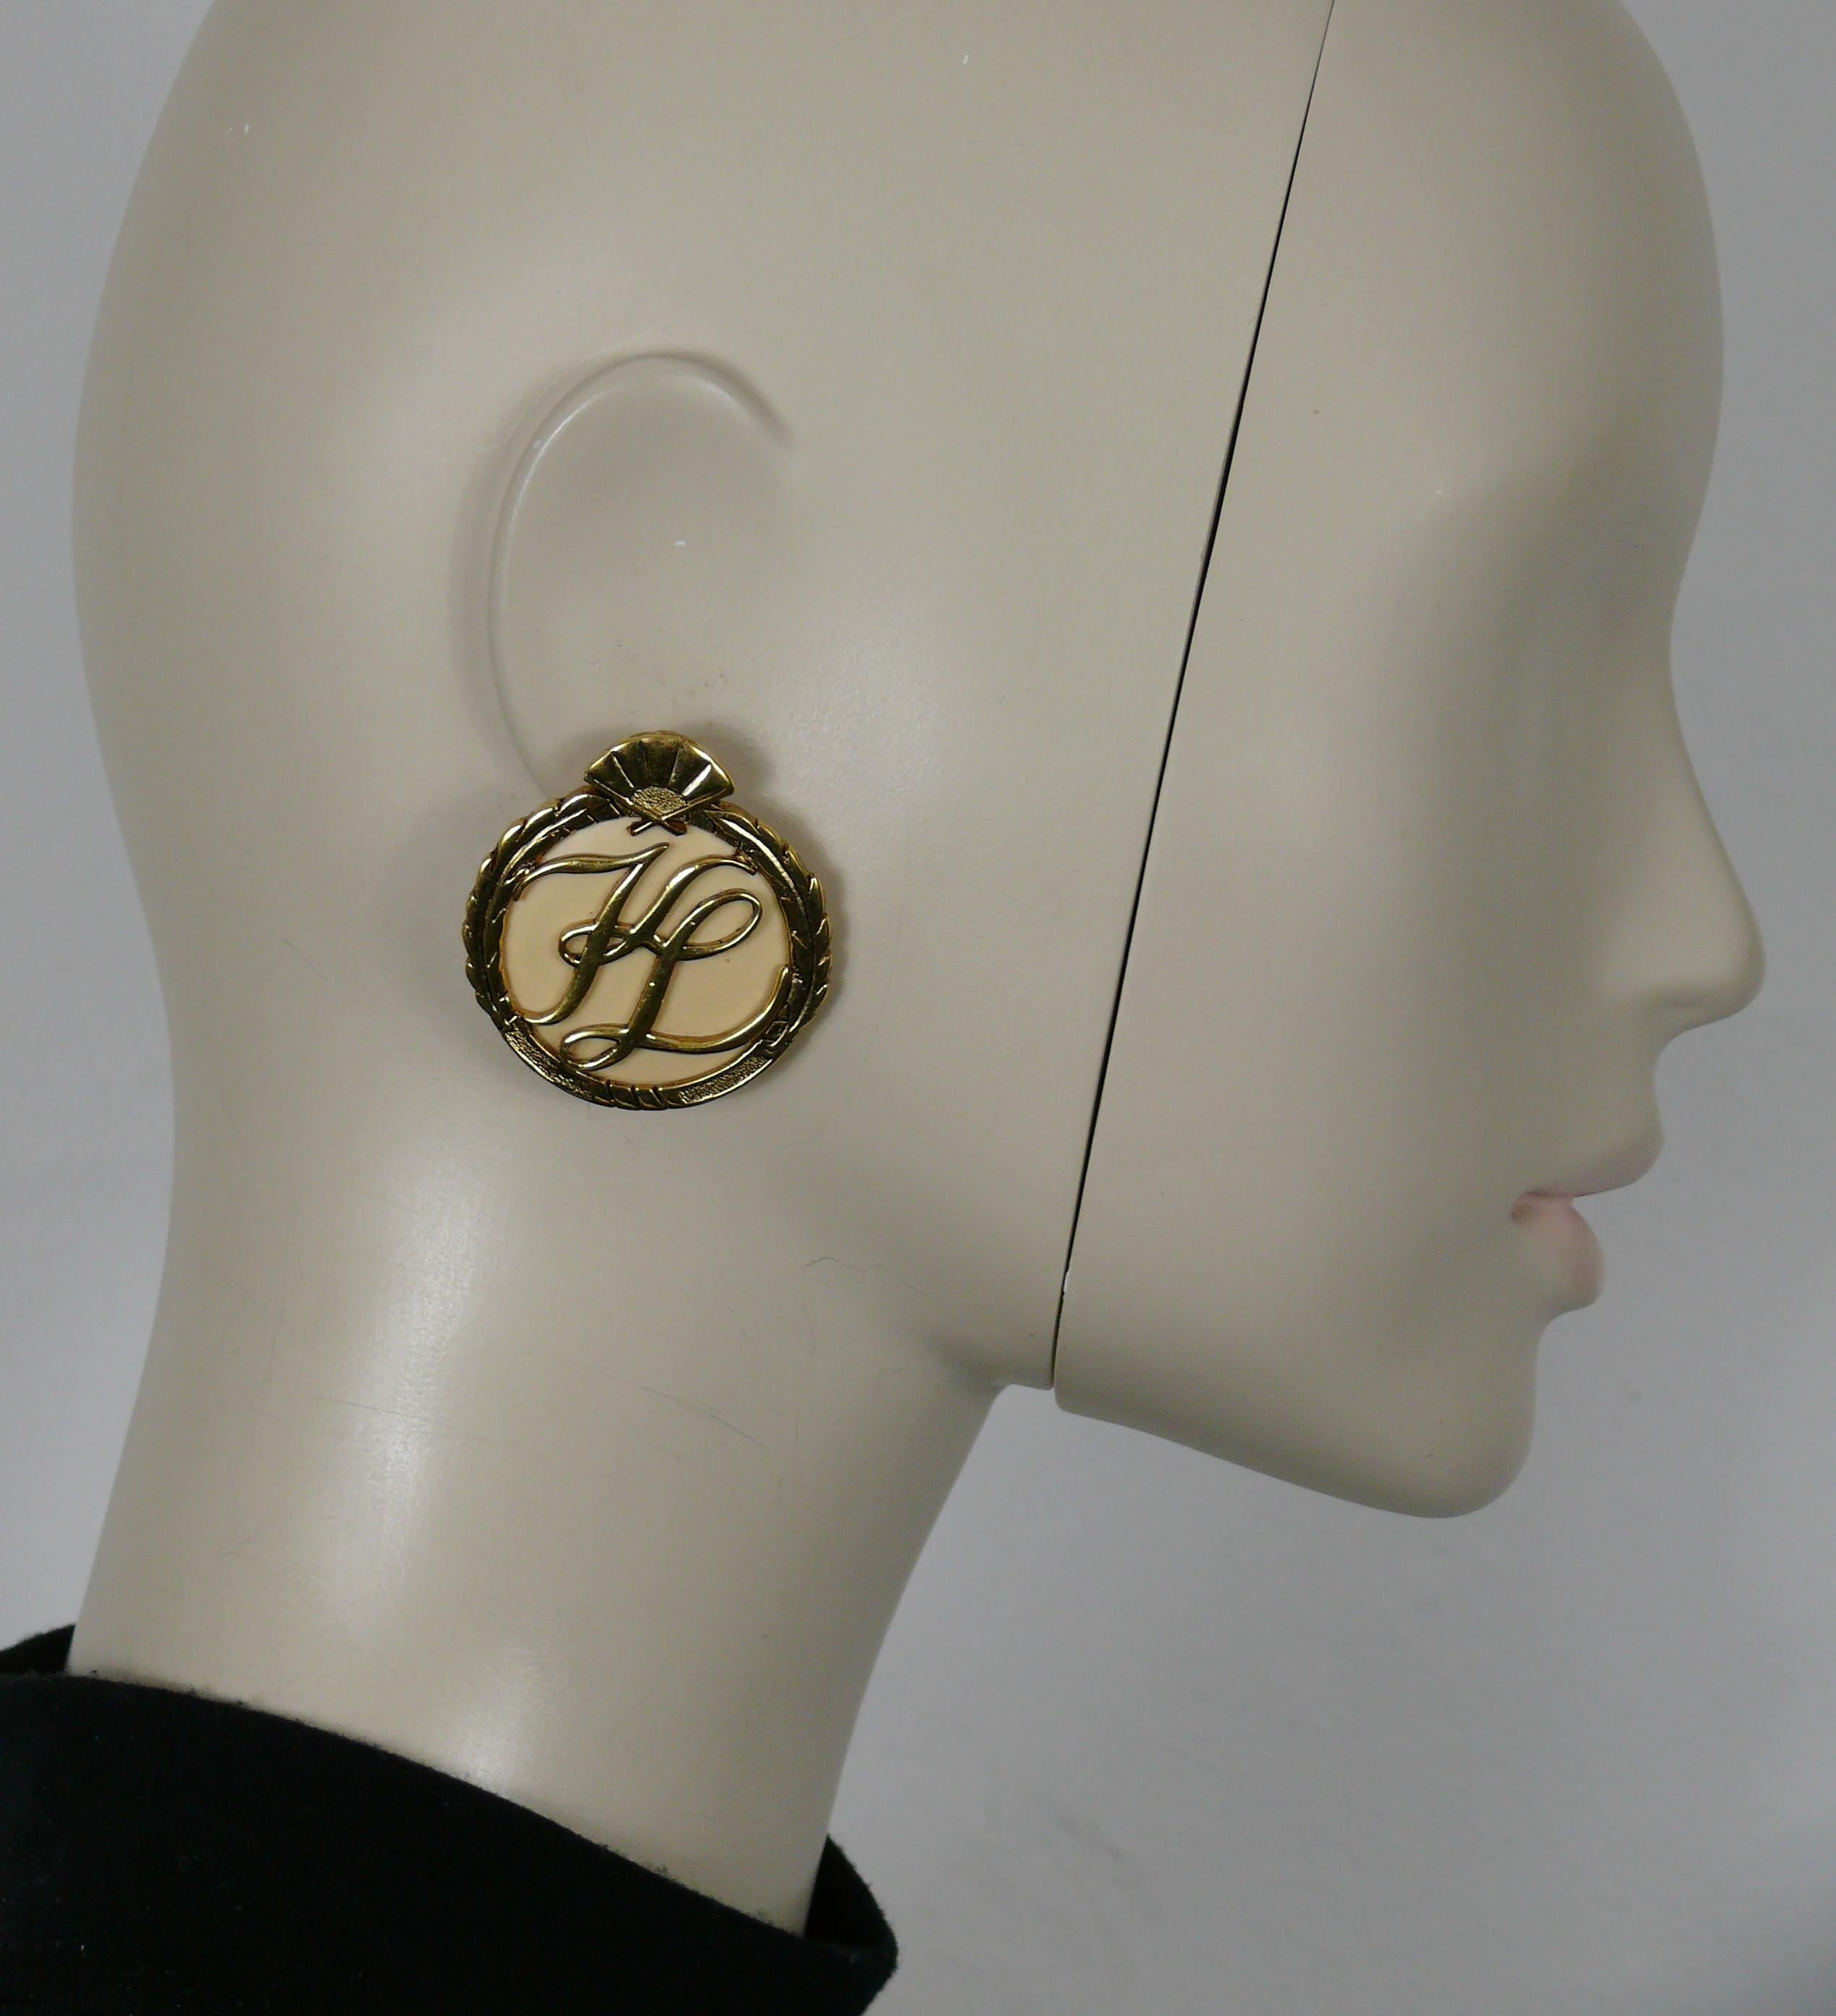 KARL LAGERFELD vintage iconic gold tone clip-on earrings featuring KL initials at the center, off-white resin background and fan at the top.

Embossed KL on the reverse sides.

Indicative measurements : diameter 4 cm (1.57 inches).

Weight per